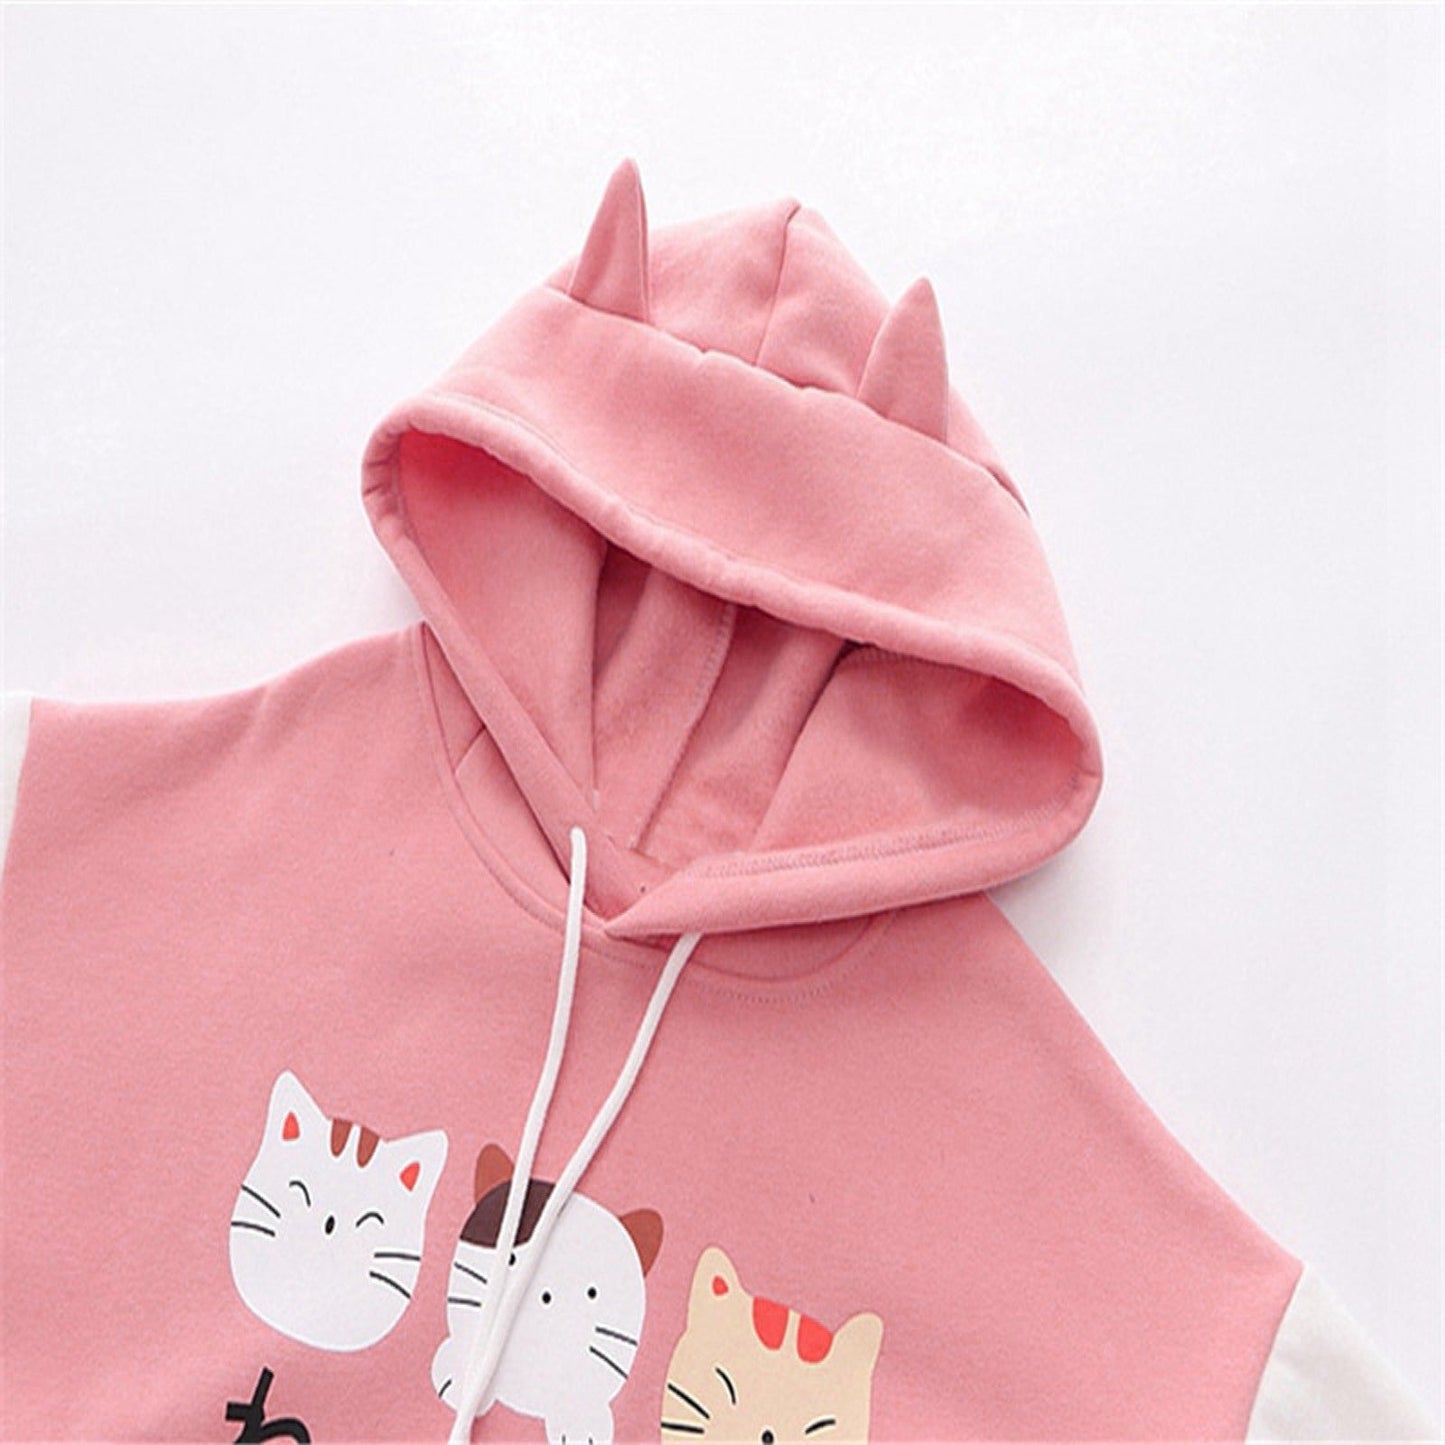 Whiskered Whimsy: Harajuku Cartoon Kitty Cat Letter Hoodie - Purr-fectly Cute Comfort! 🐾💖